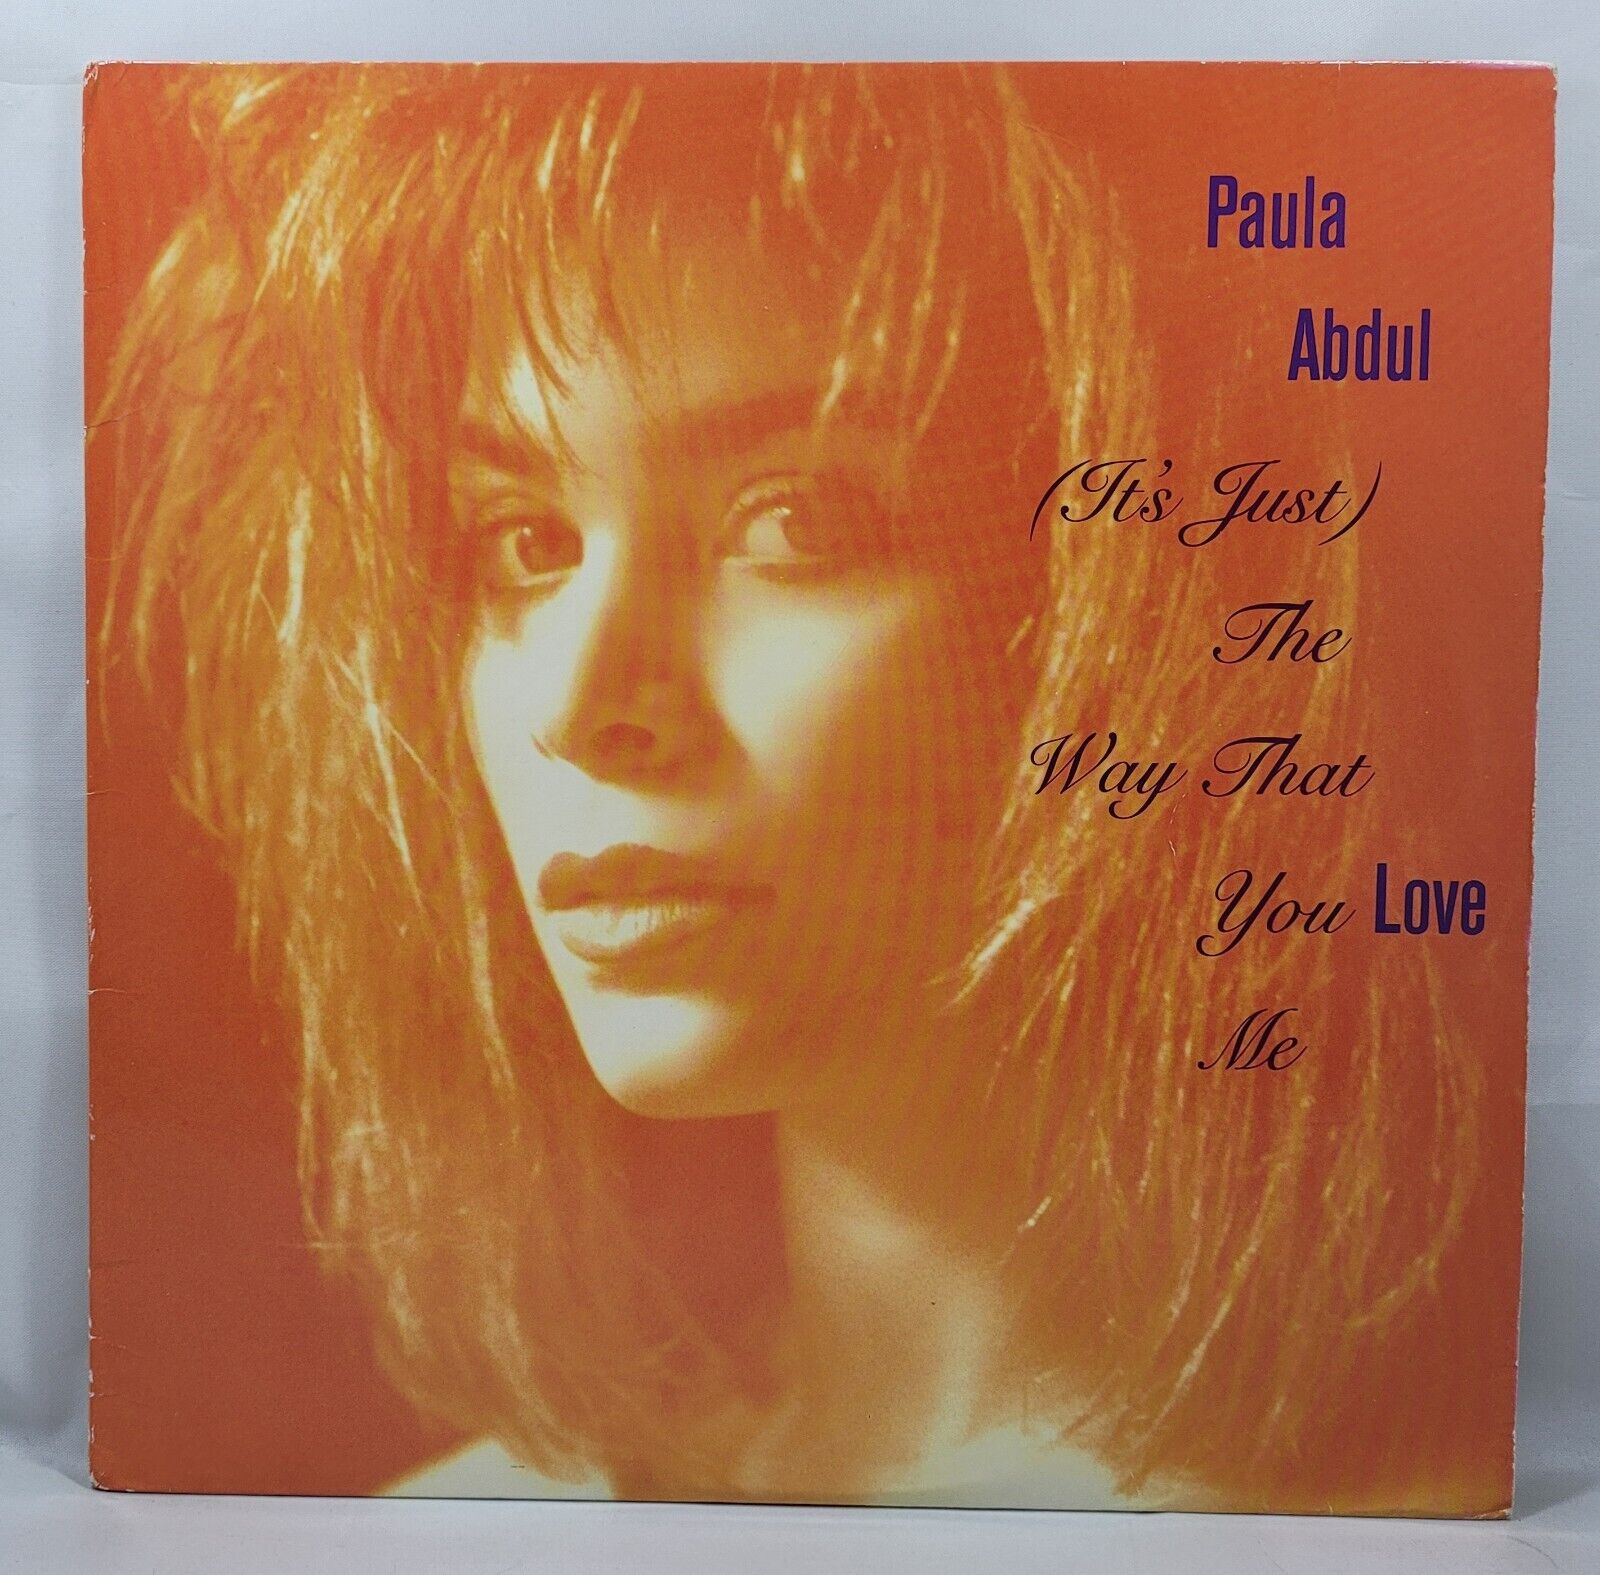 Paula Abdul - (It's Just) The Way That You Love Me [1988 Used Vinyl 12' Single]